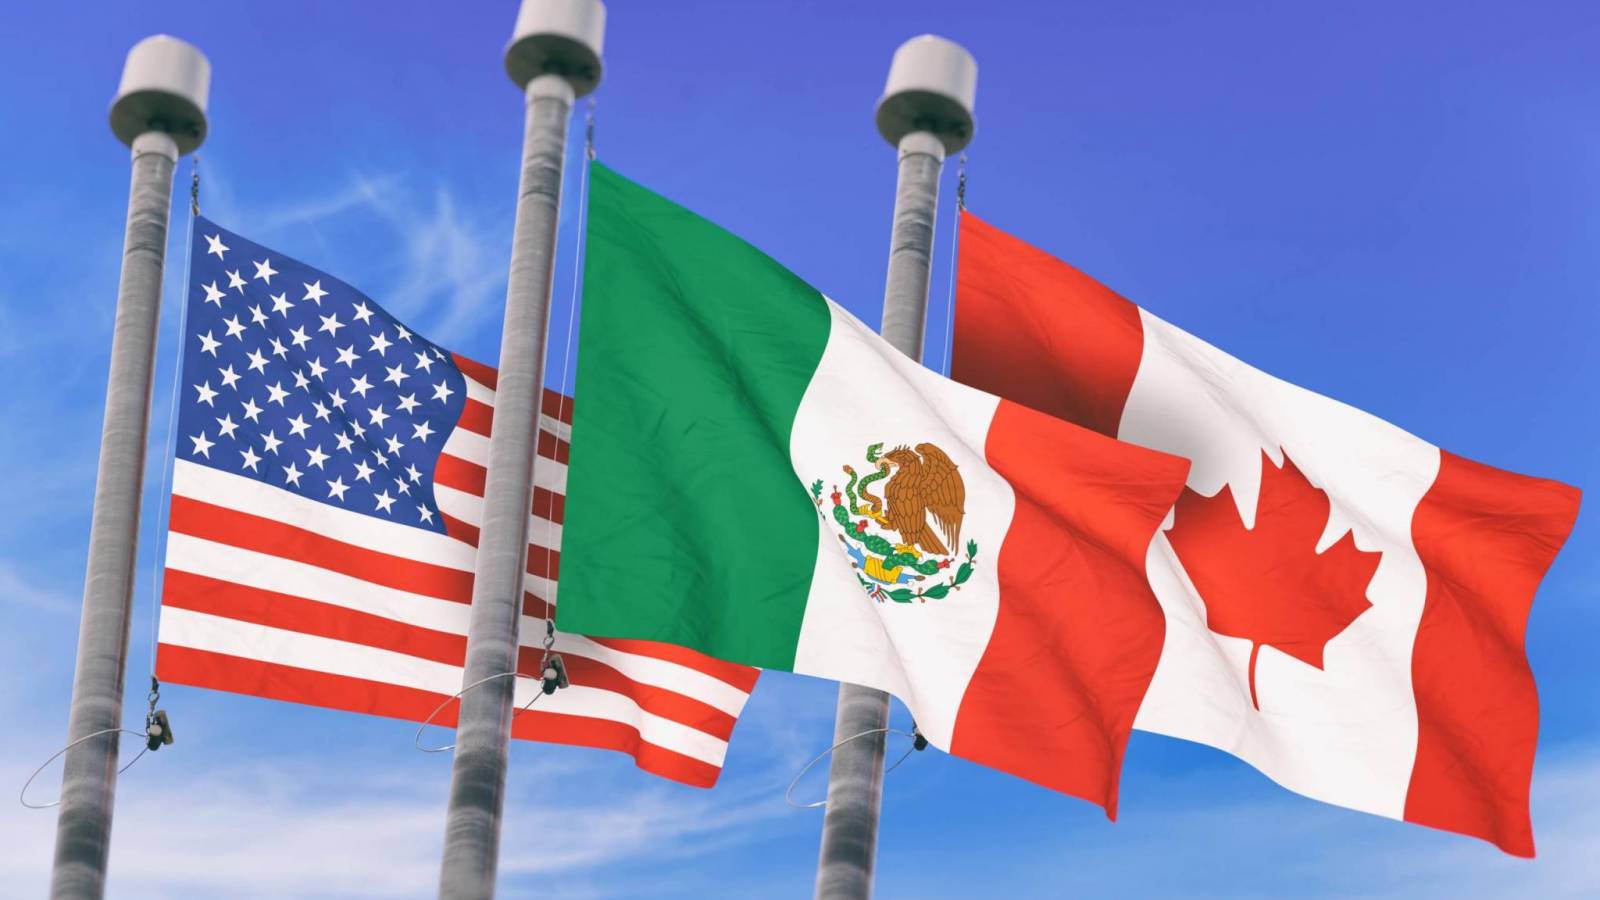 what does nafta stand for and when was the north american free trade agreement signed by the united states